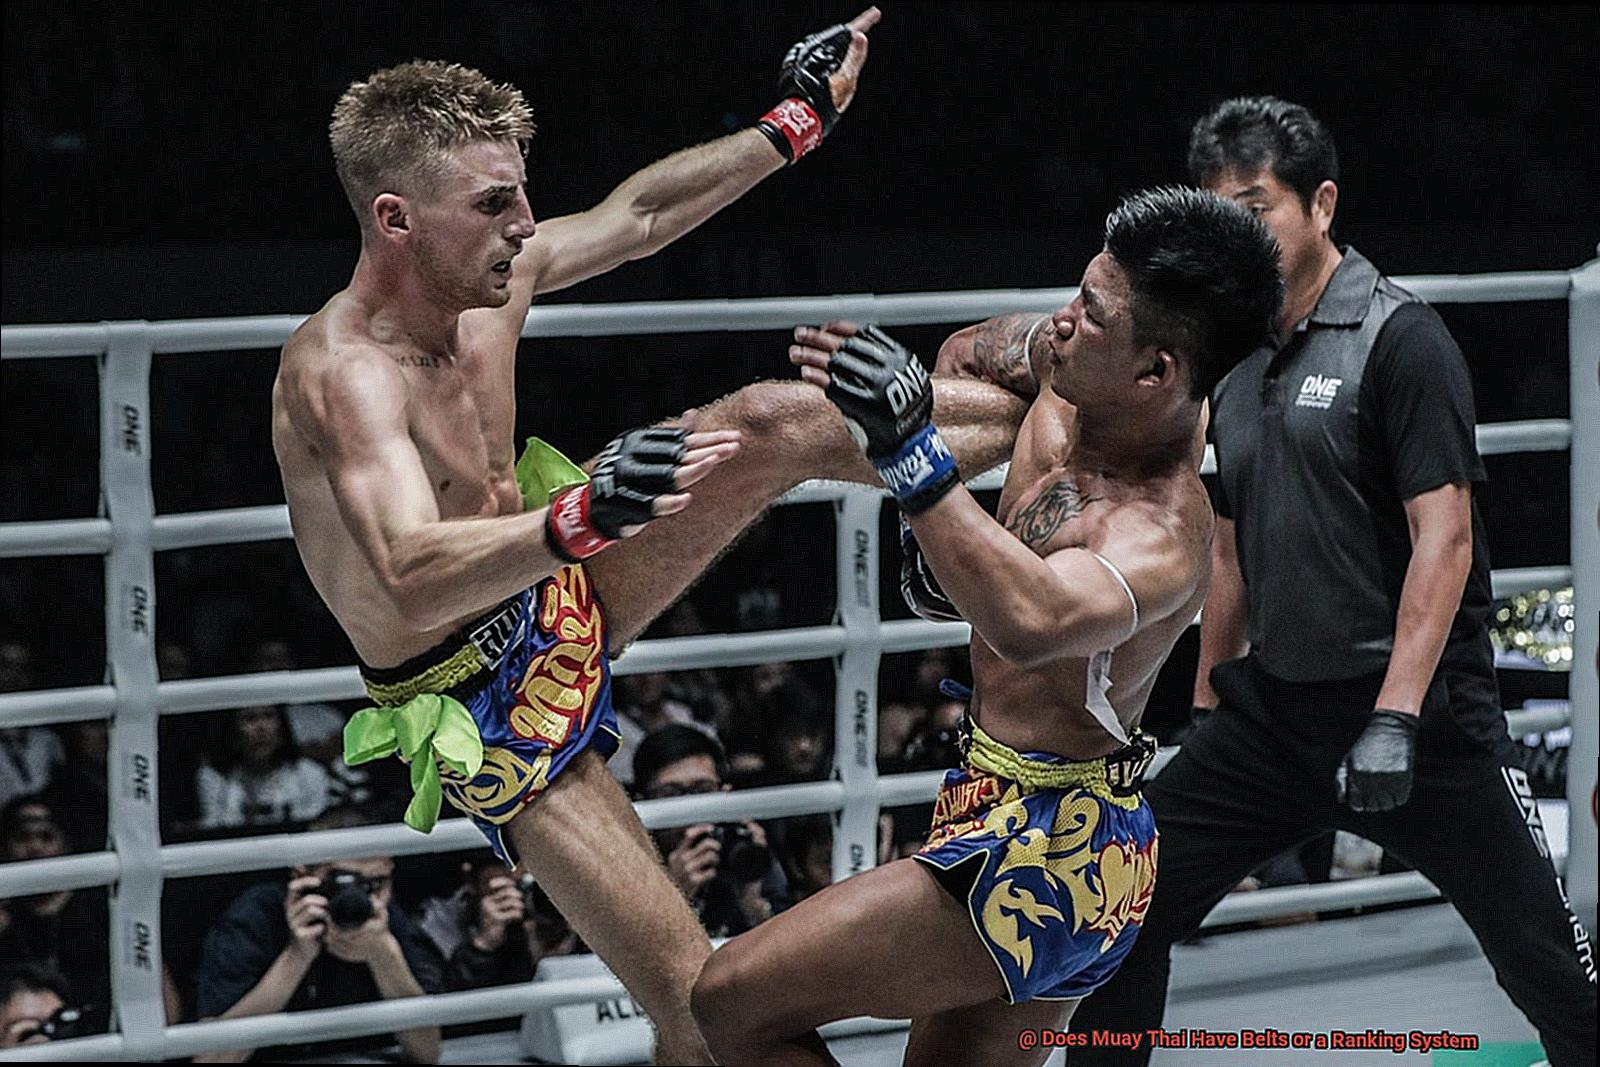 Does Muay Thai Have Belts or a Ranking System-2